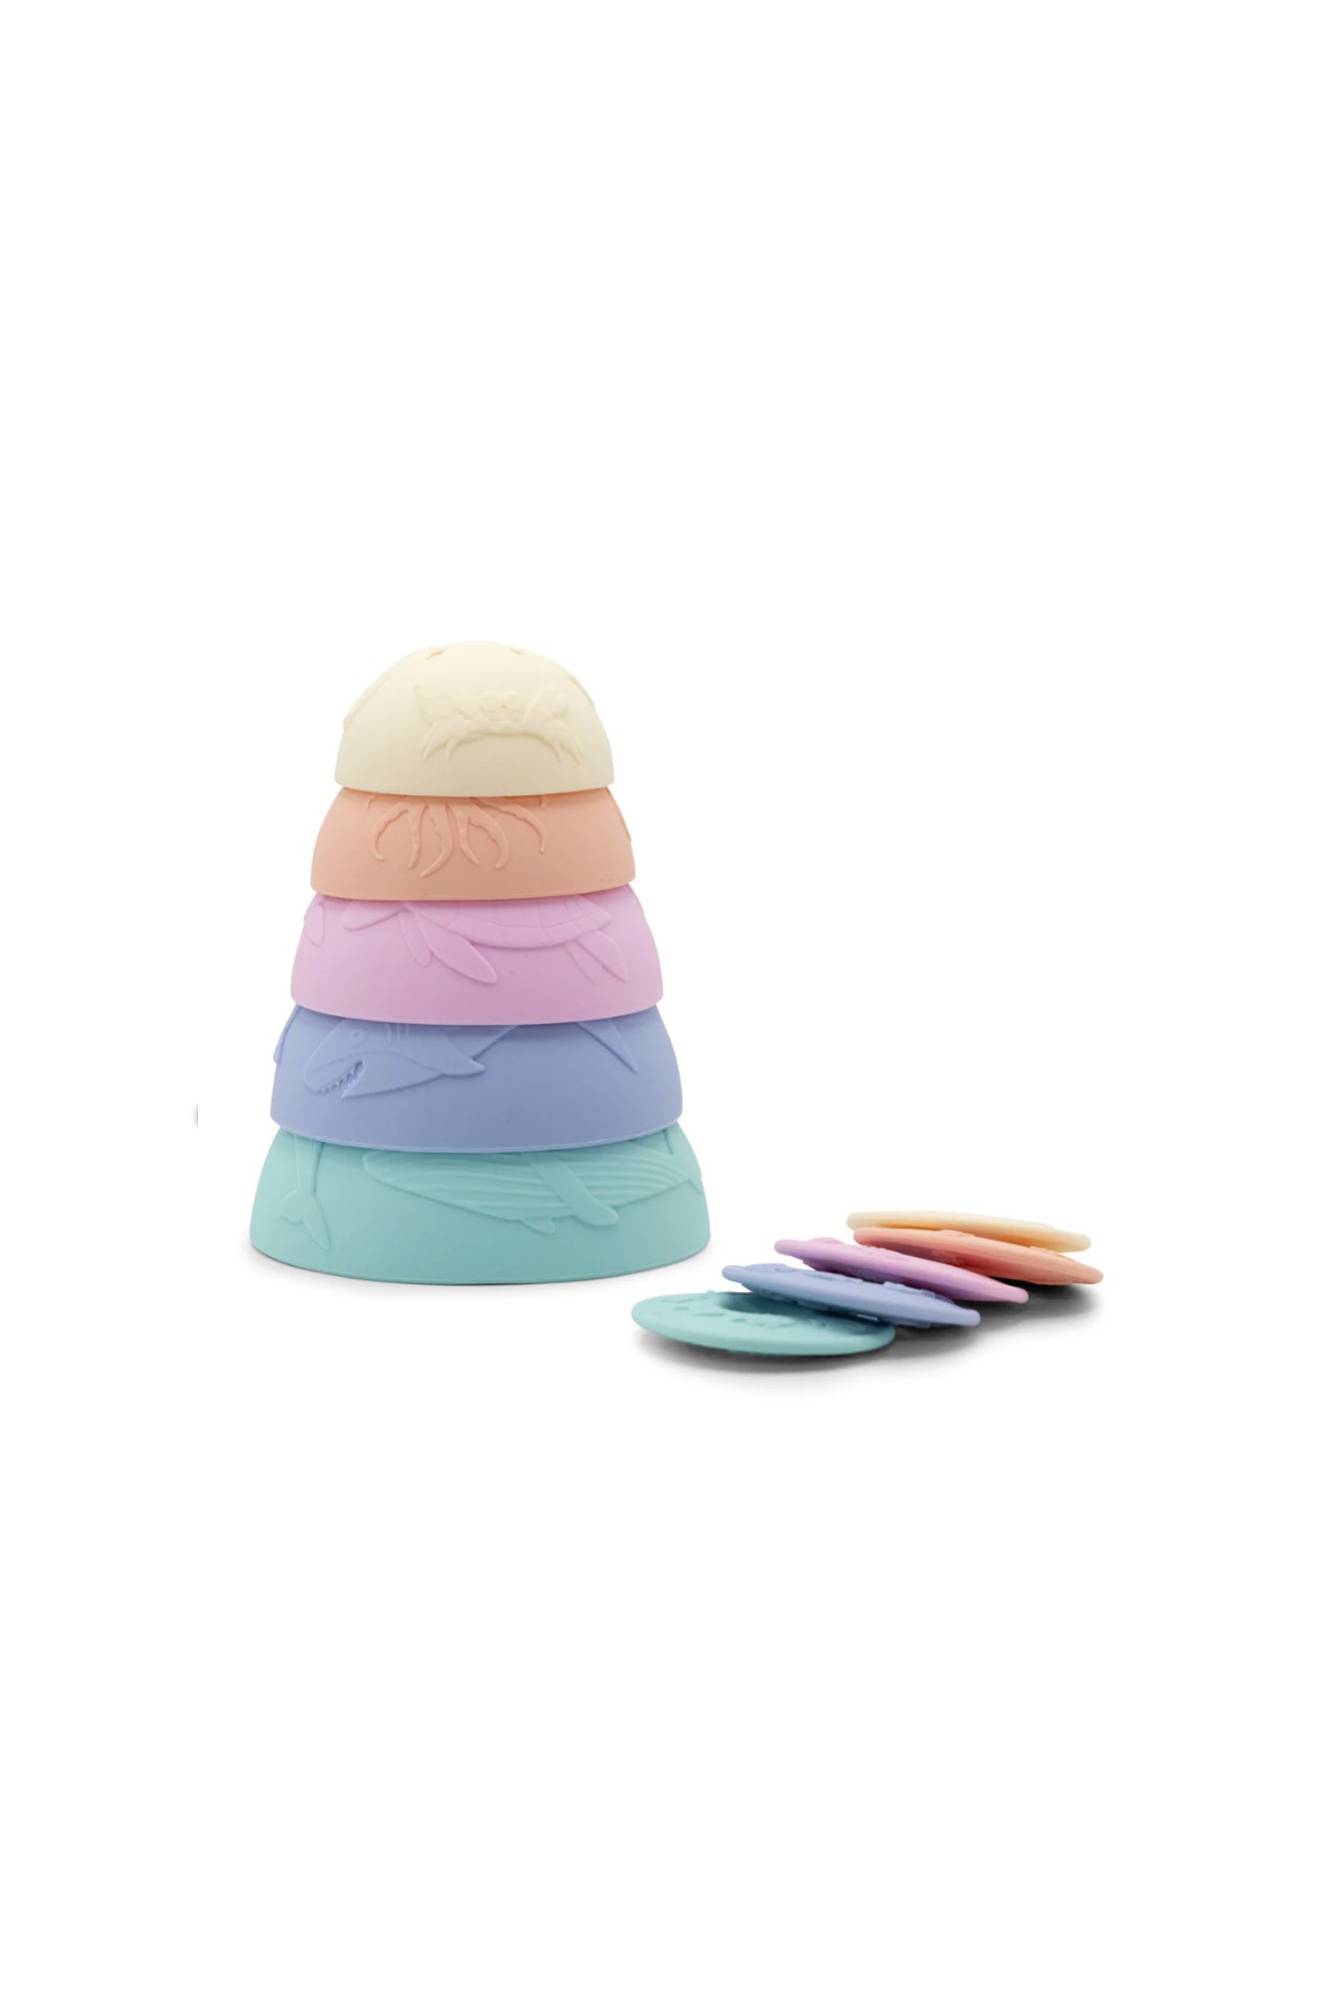 Jellystone Ocean Stacking Cups Pack of 5 - Rainbow Pastel